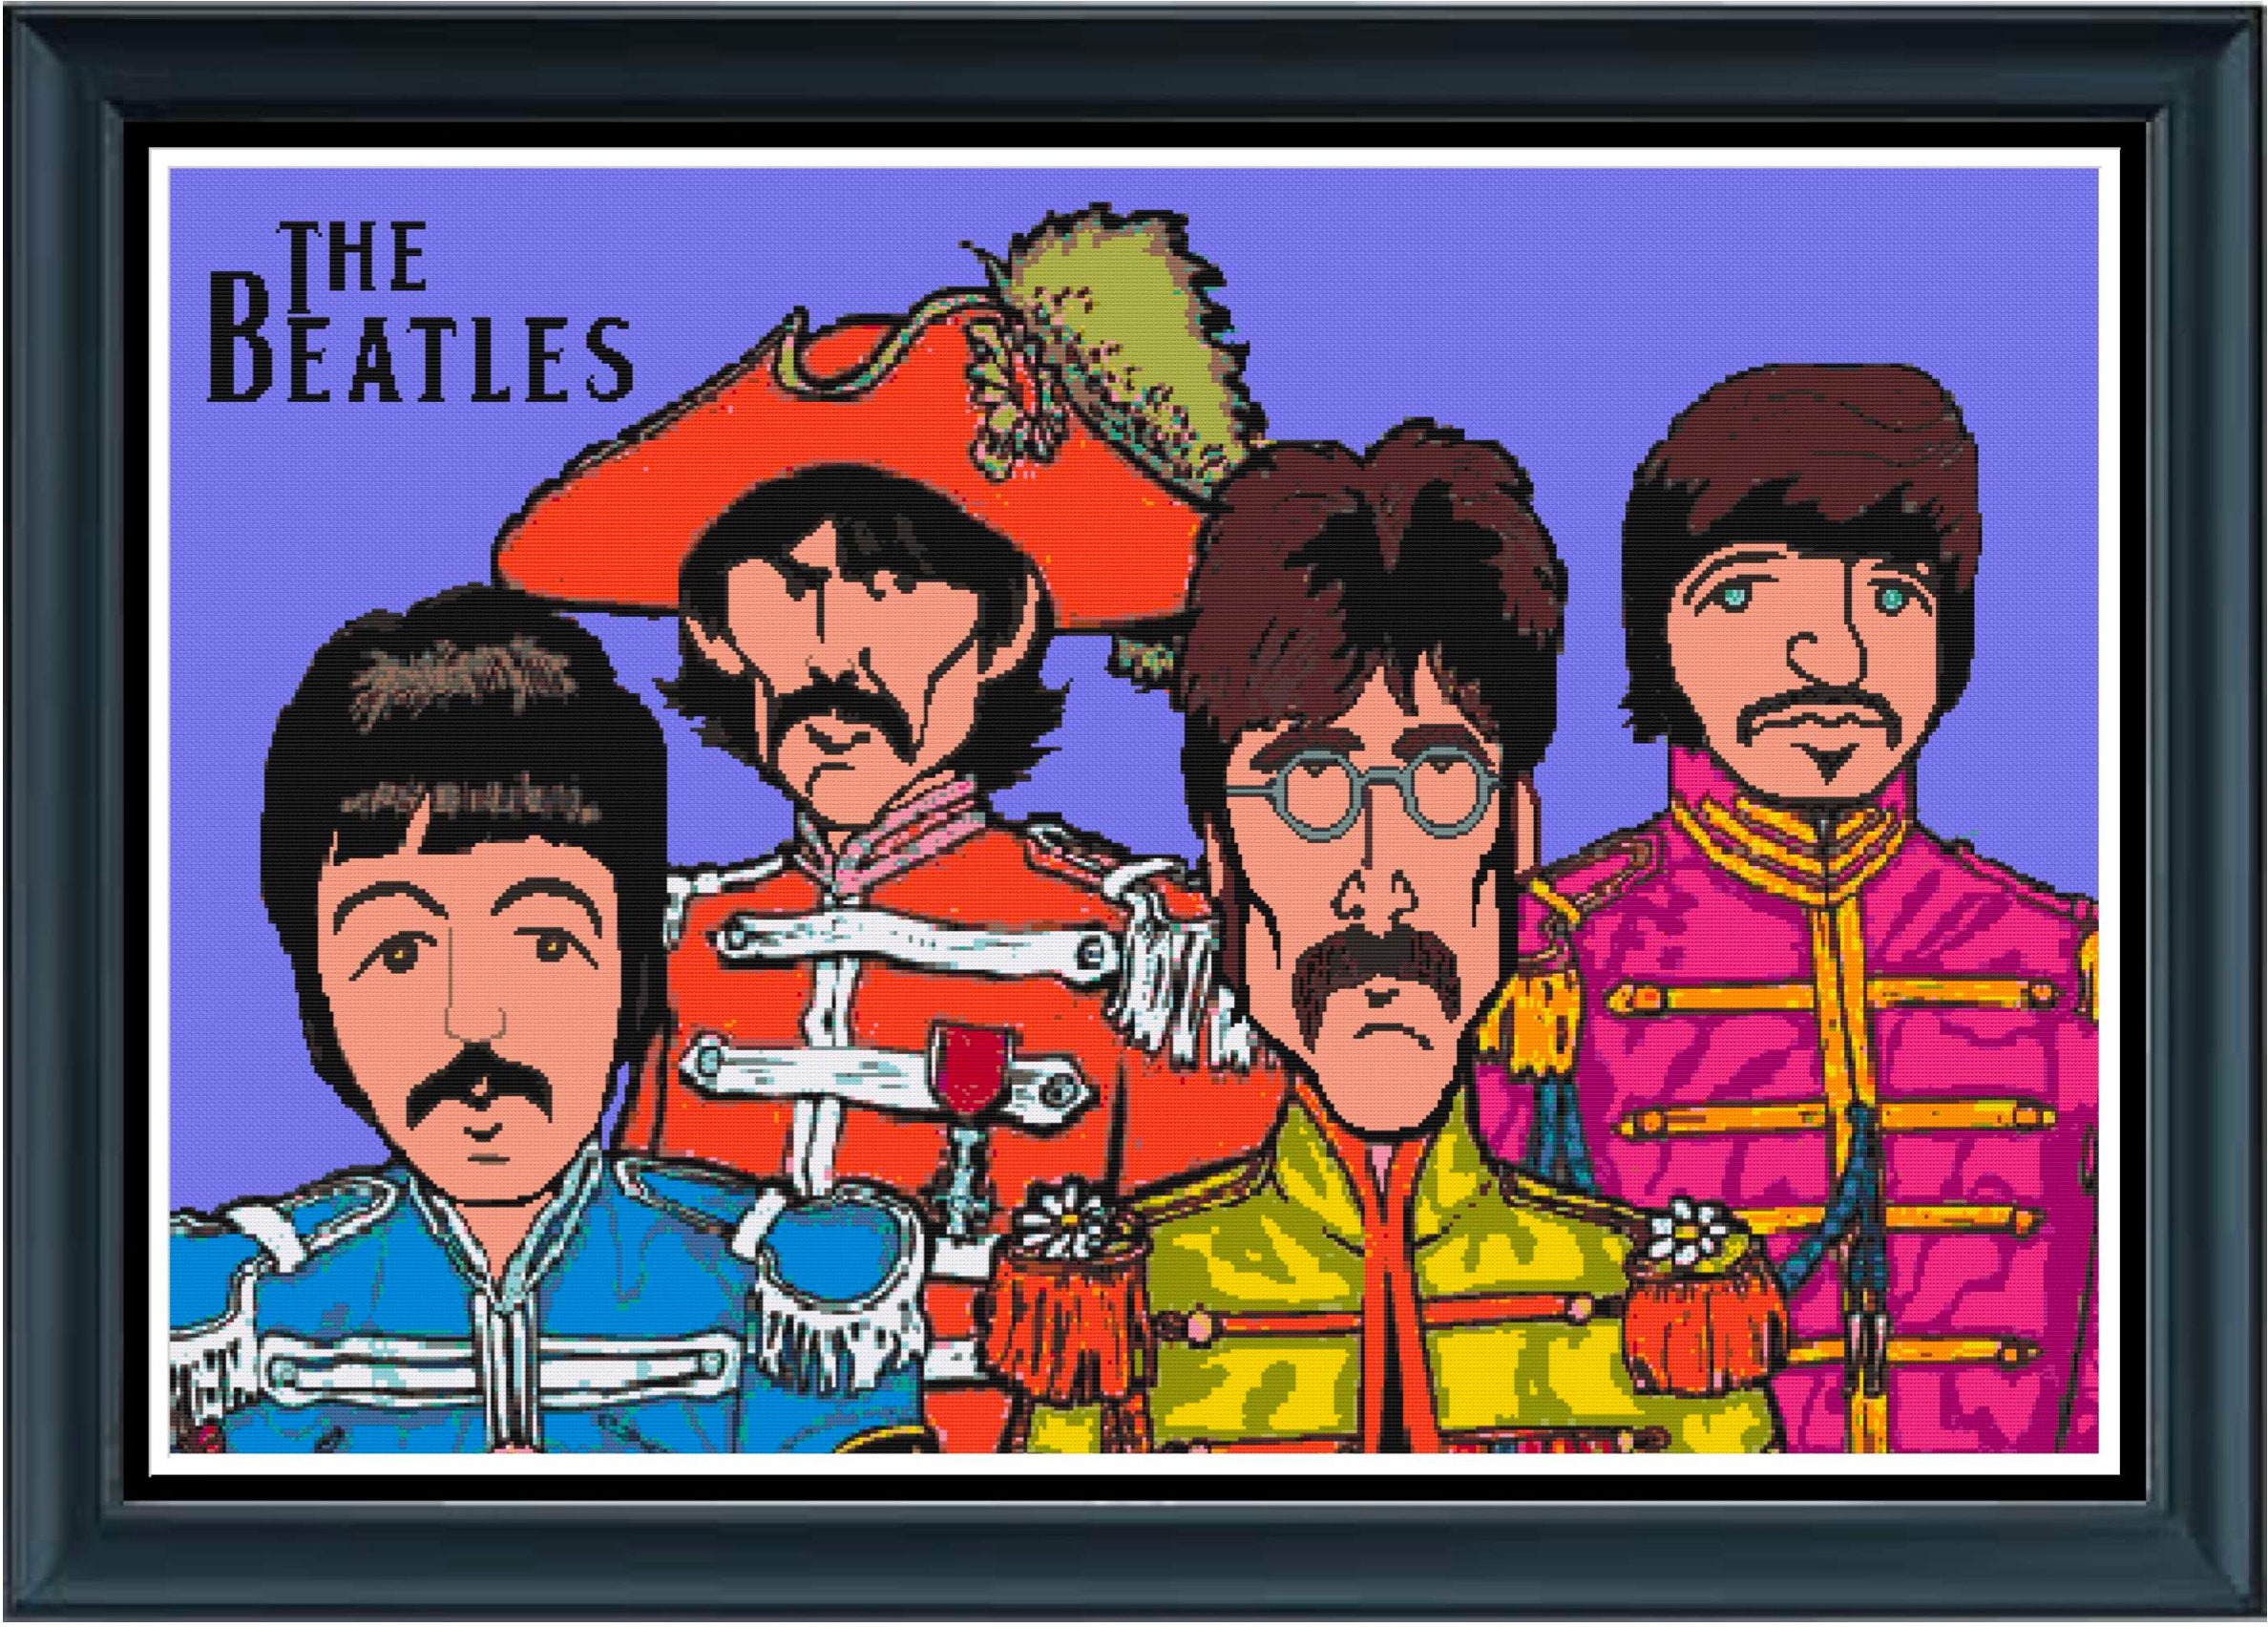 The Beatles Sgt Pepper's Lonely Hearts Club Band - Etsy Canada